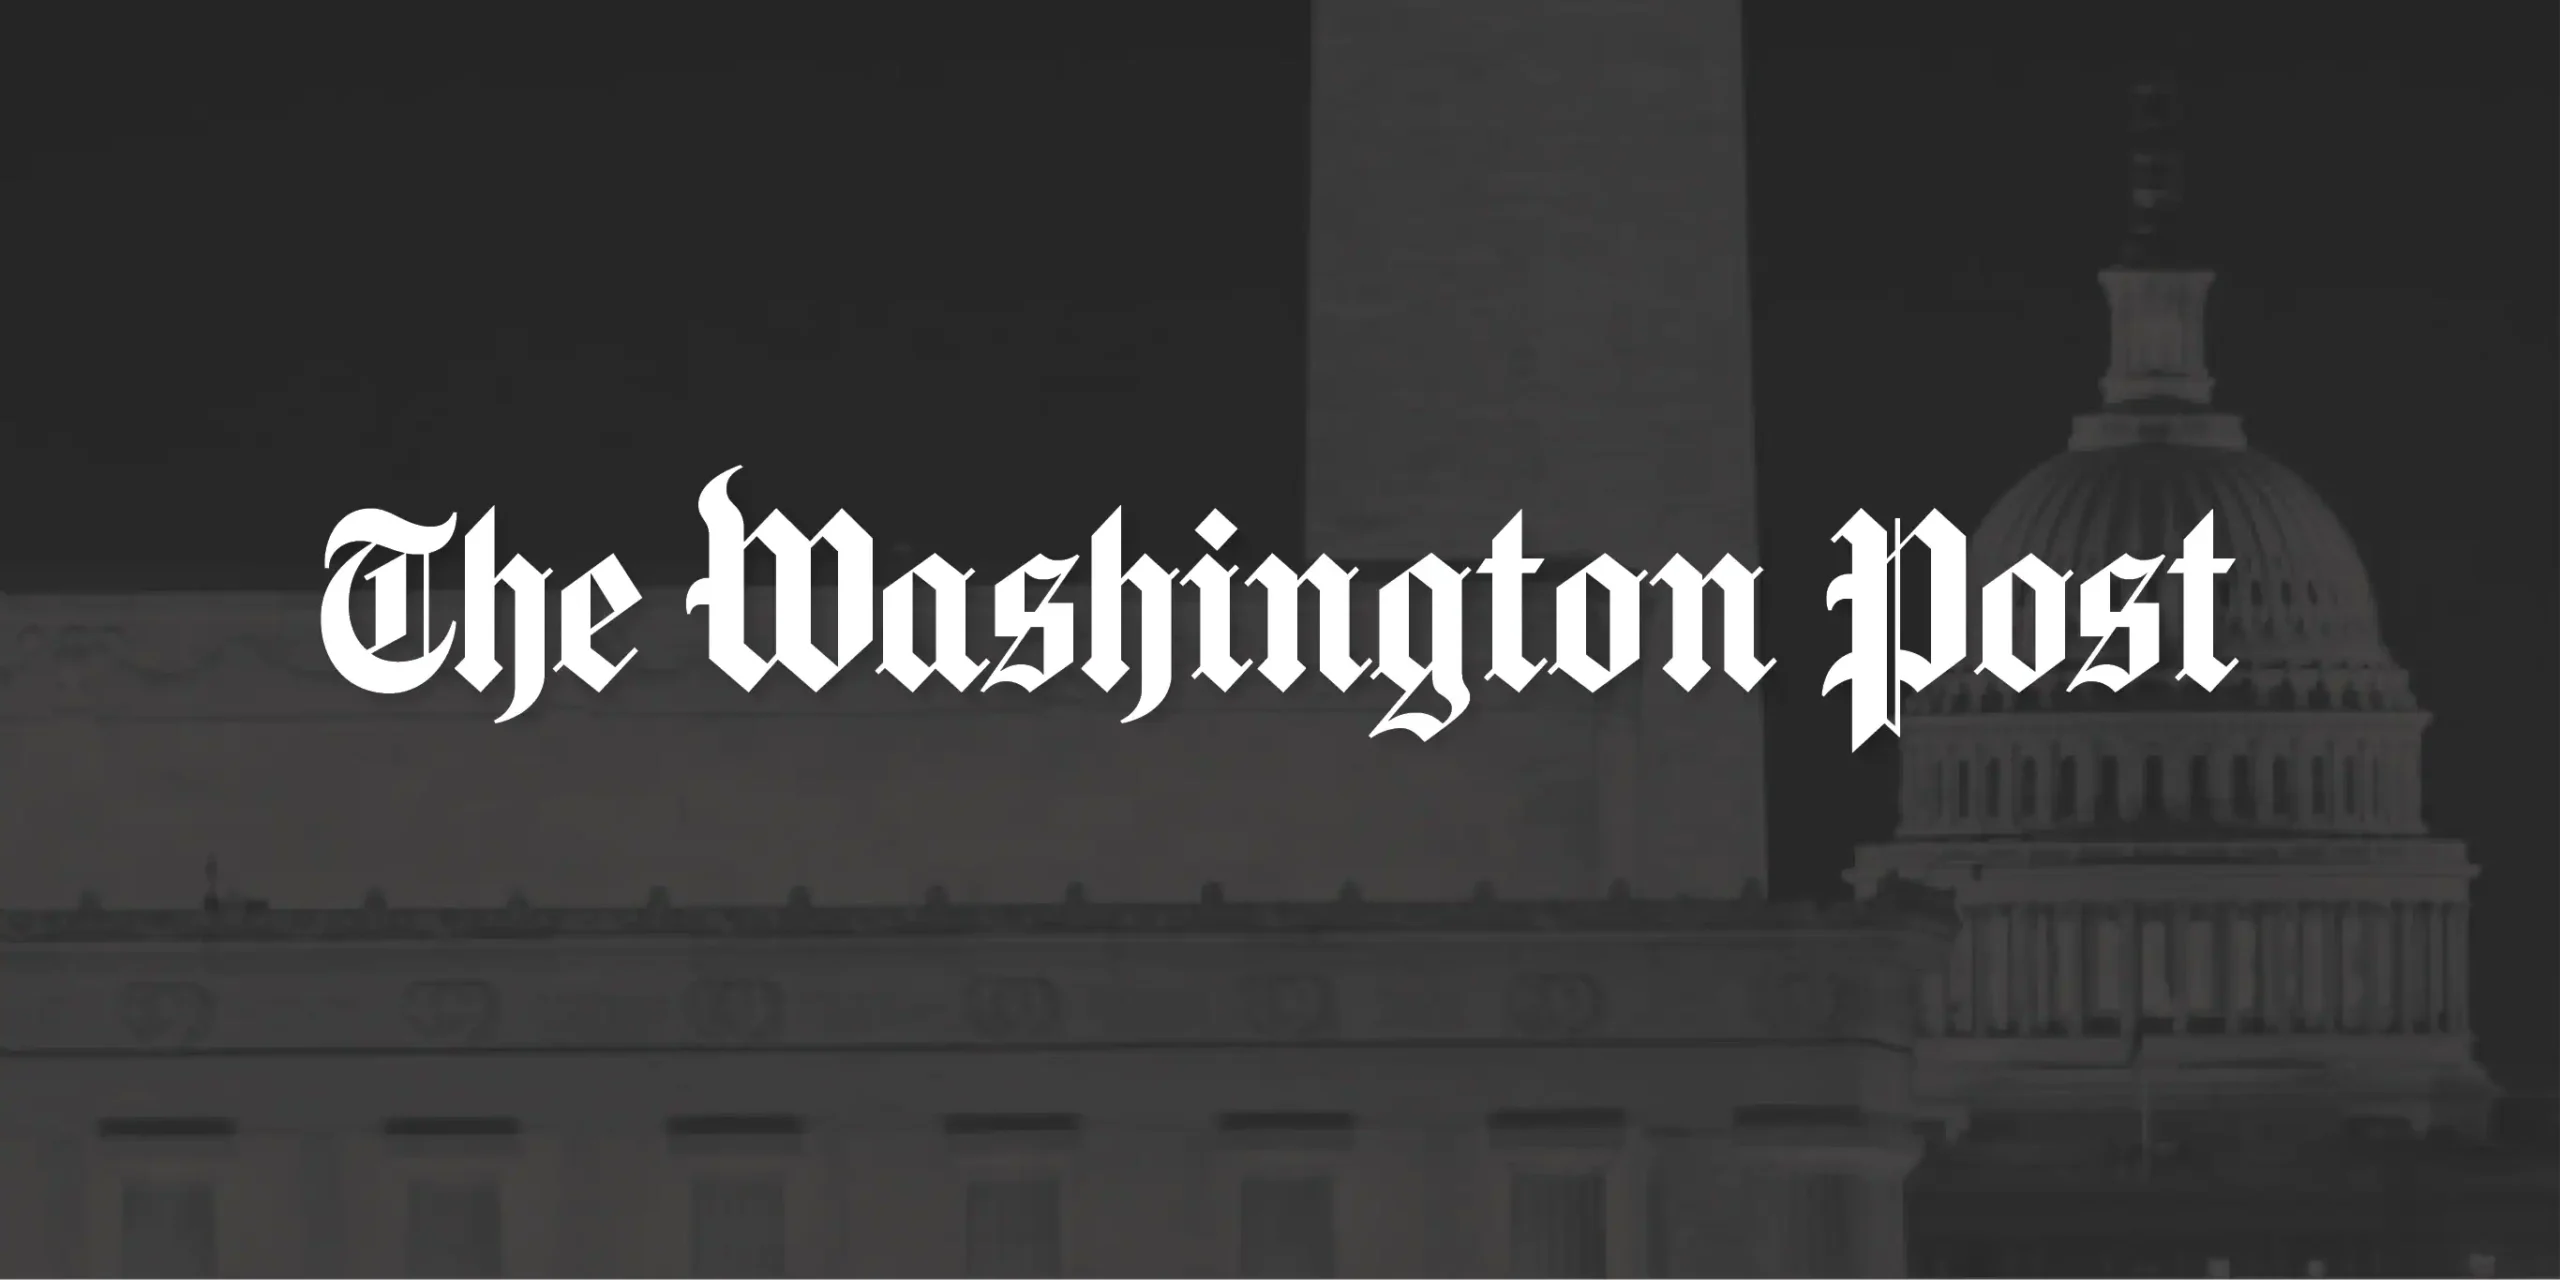 The Washington Post Chrome ExtensionNavigating News in the Digital Age